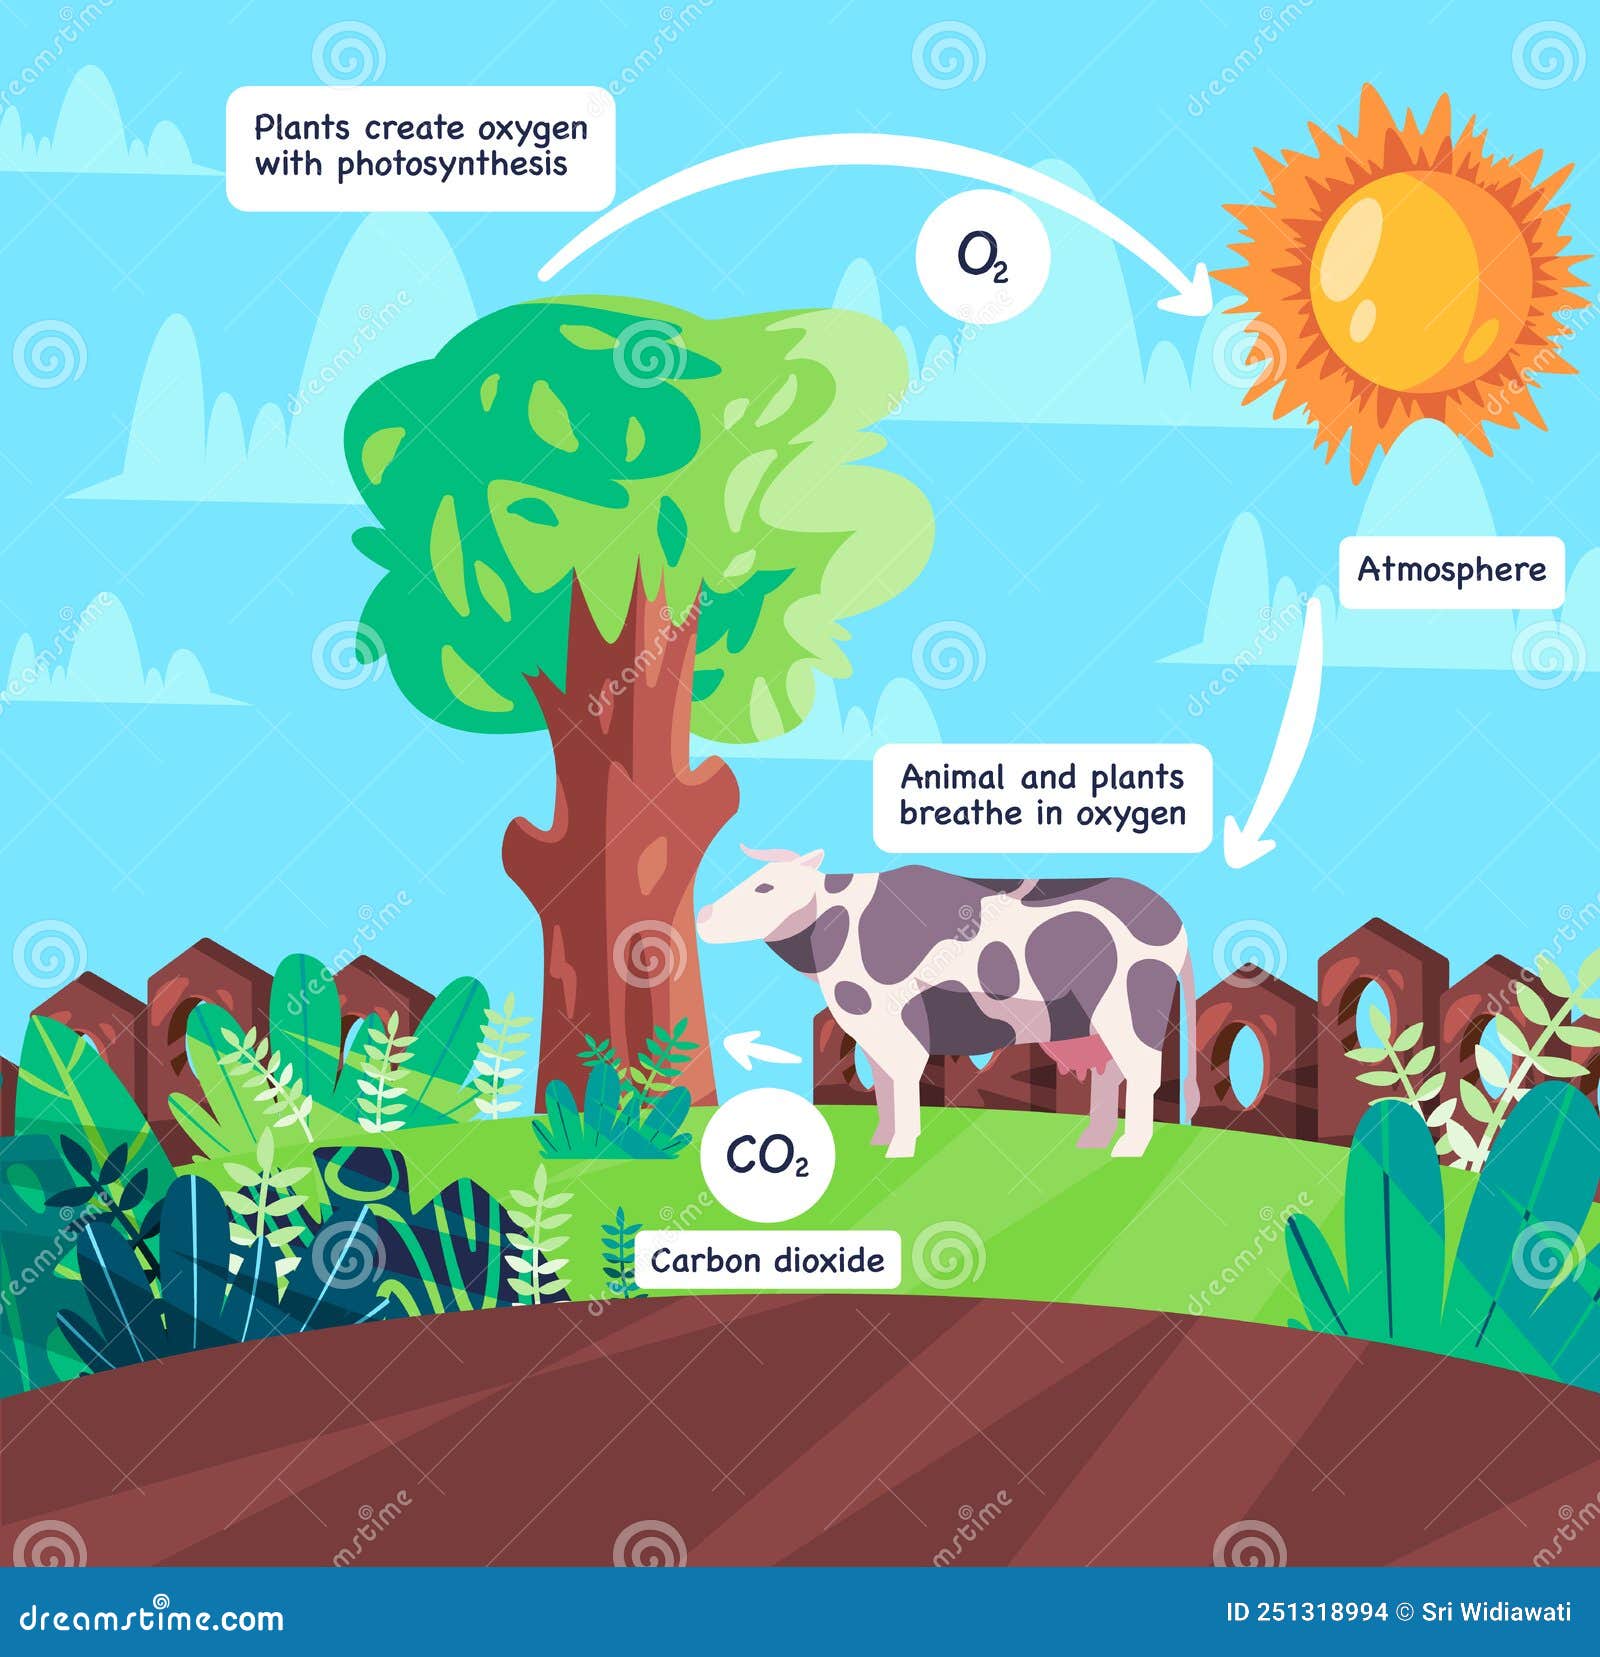 Oxygen Cycle Animal Respiration And Photosynthesis Process Producing ...